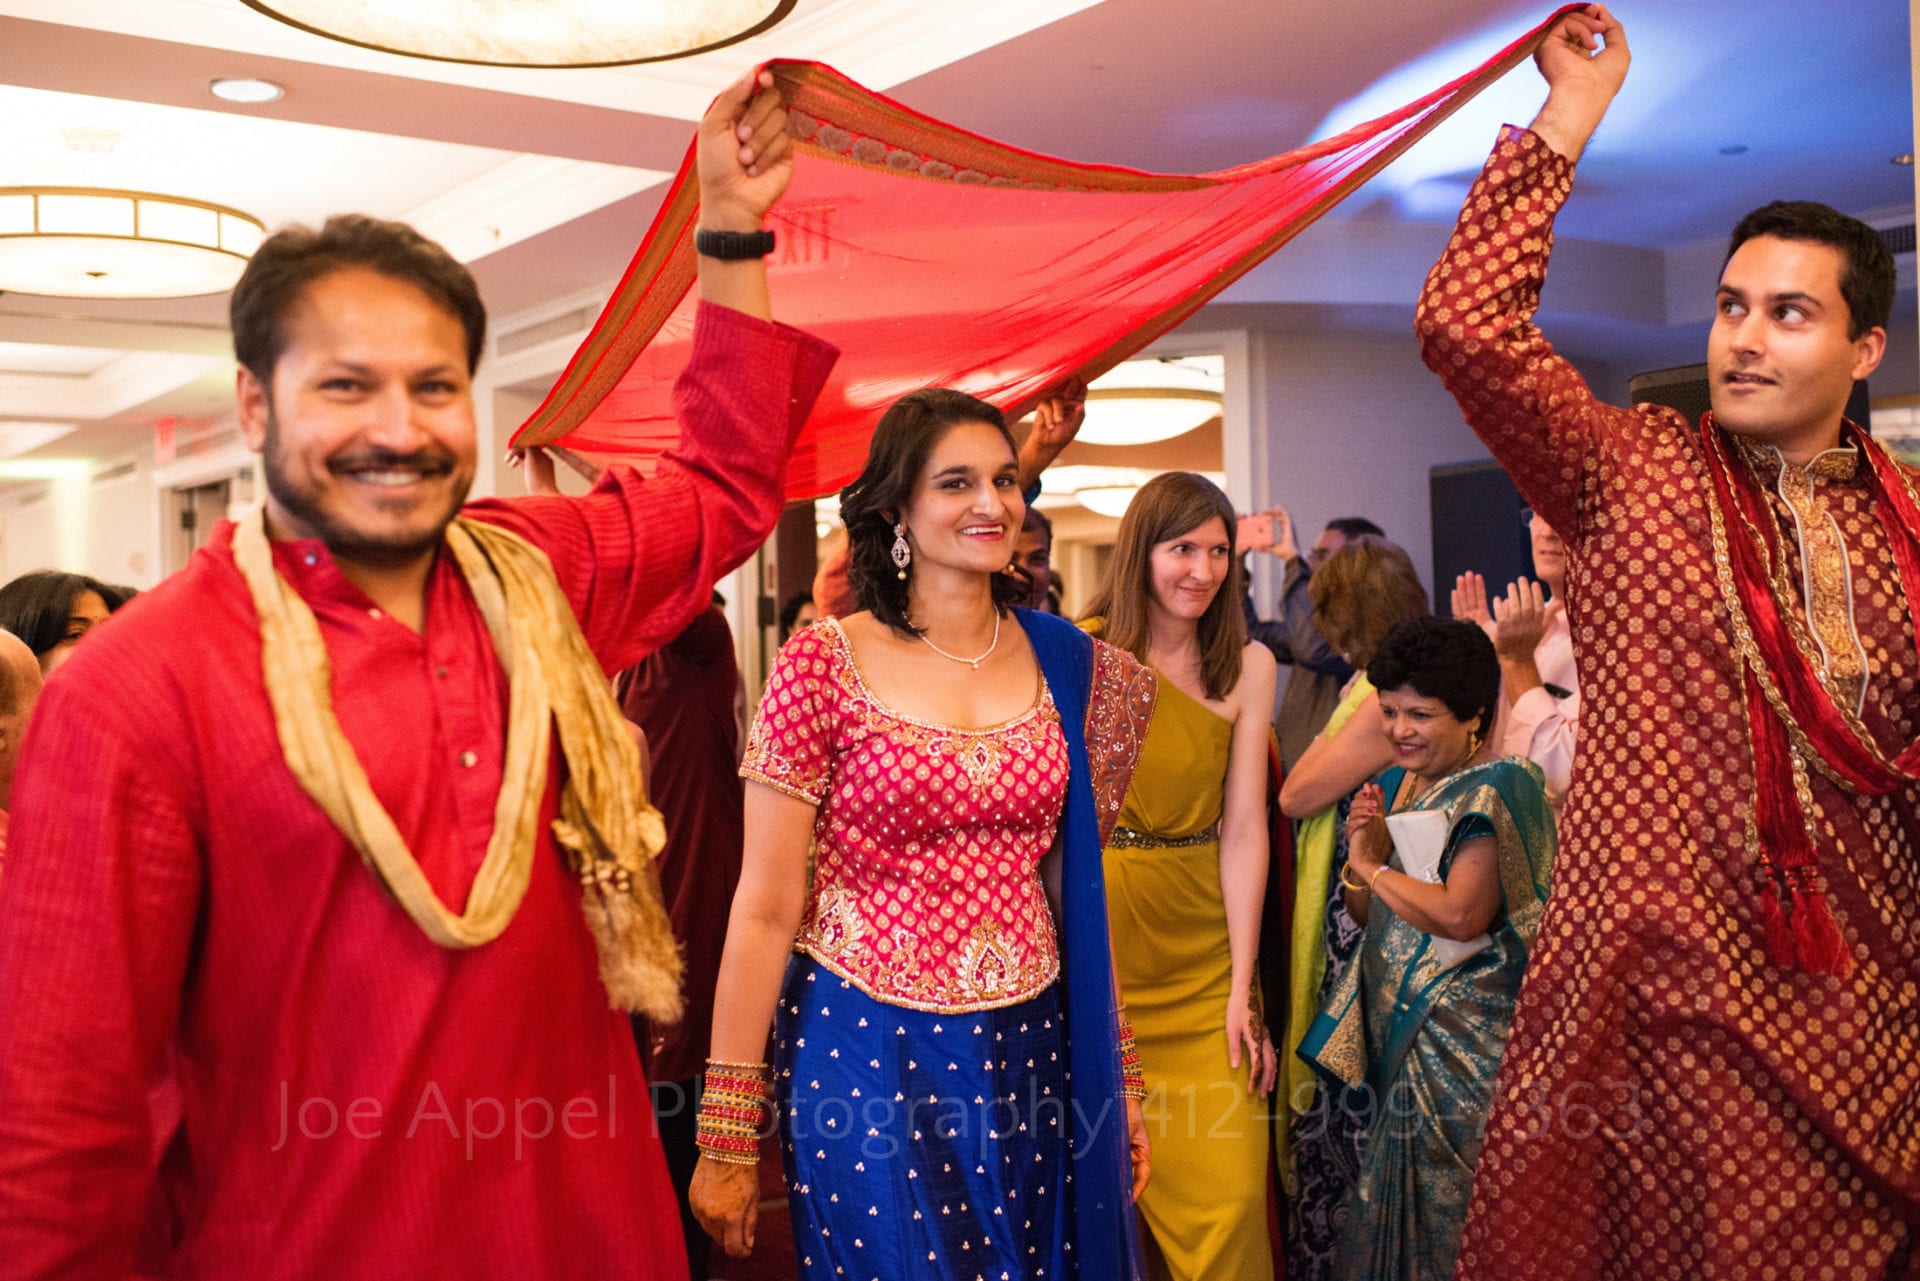 men in red kurtas hold a red and gold sheet over a bride wearing a red and blue sari